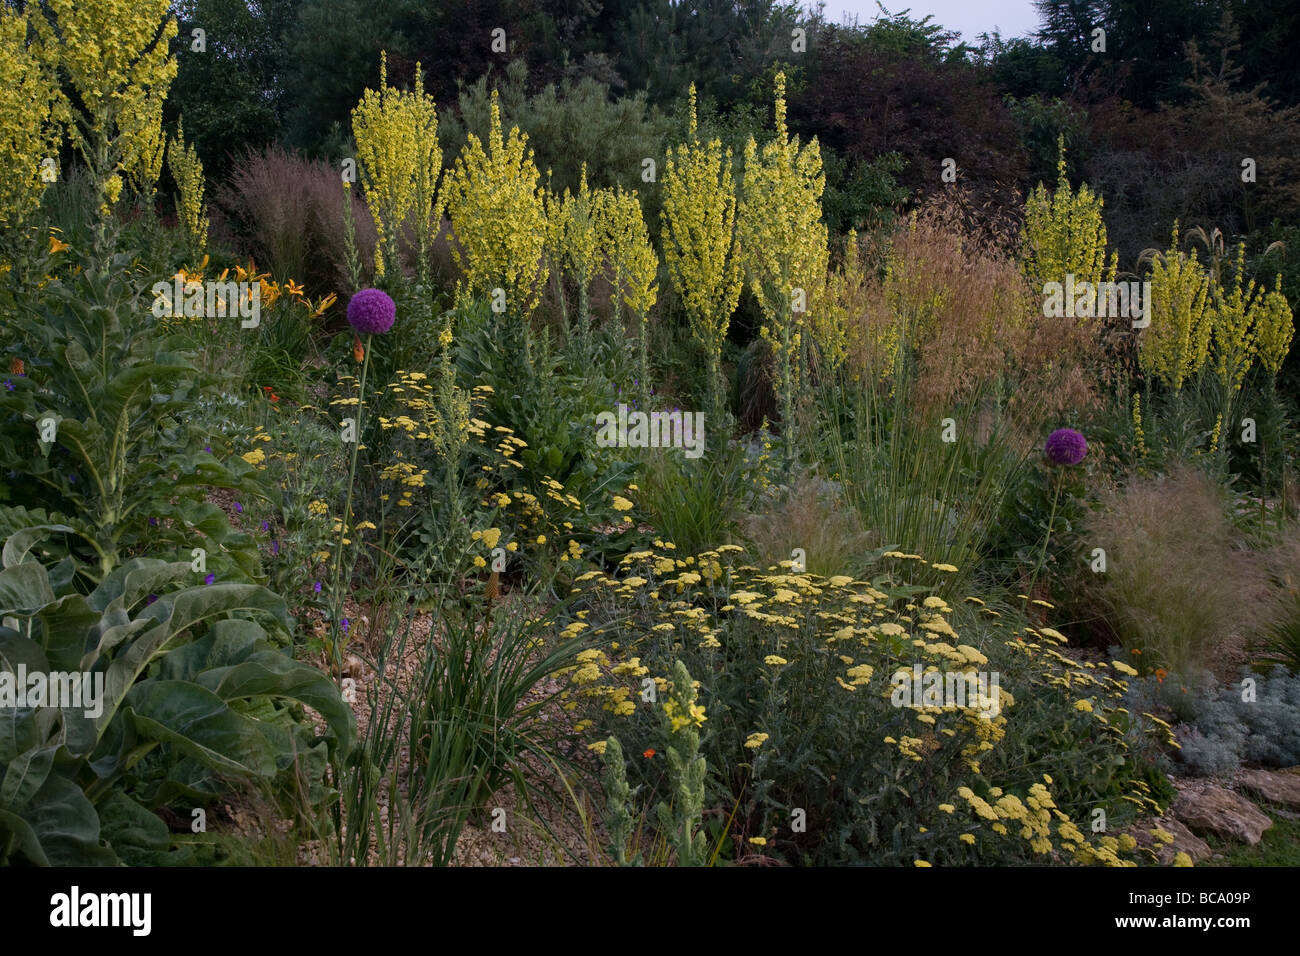 grasses, perennials and steppe planting in the UK Stock Photo